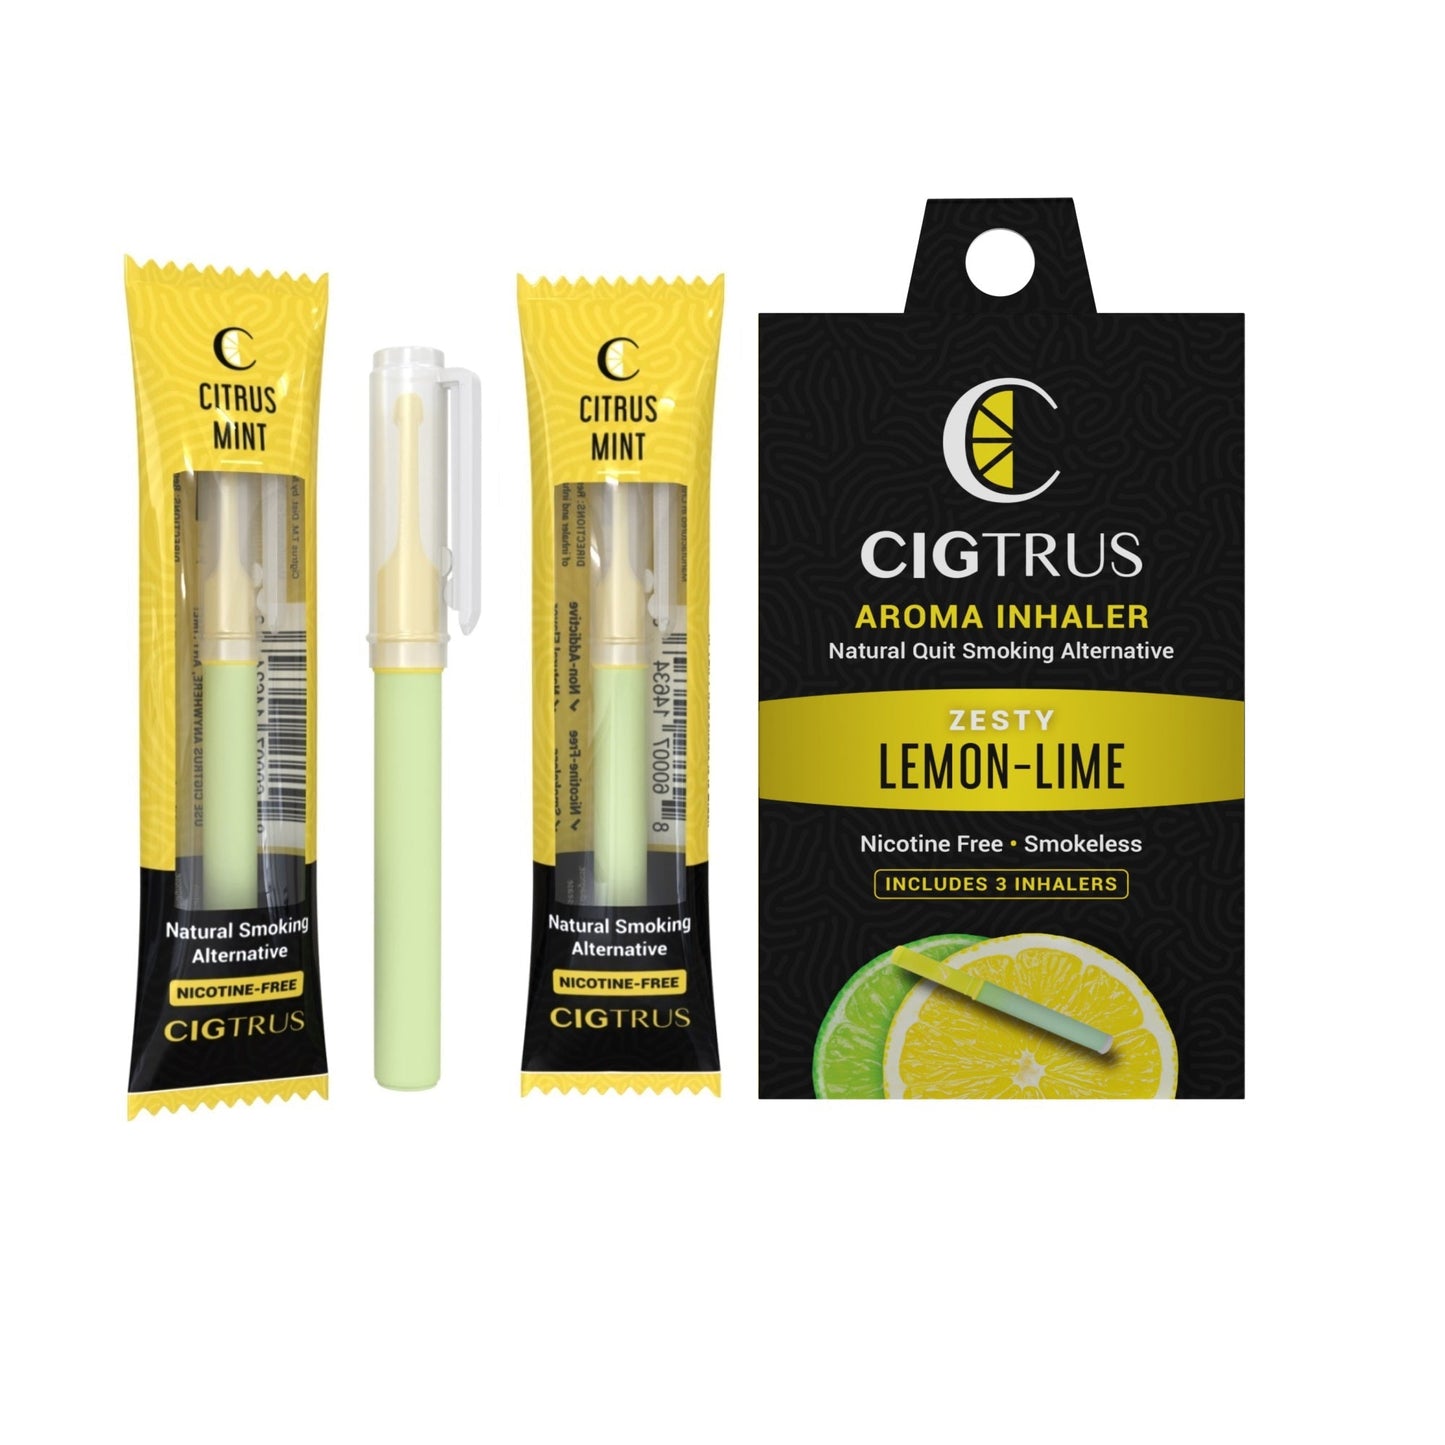 Cigtrus: Kick the Habits with Delicious & Refreshing Smokeless Nicotine-Free Flavored Air Puffer - Satisfy Oral Fixation, and Cravings Relief - 4-Flavor, 3 Pack Variety Pack